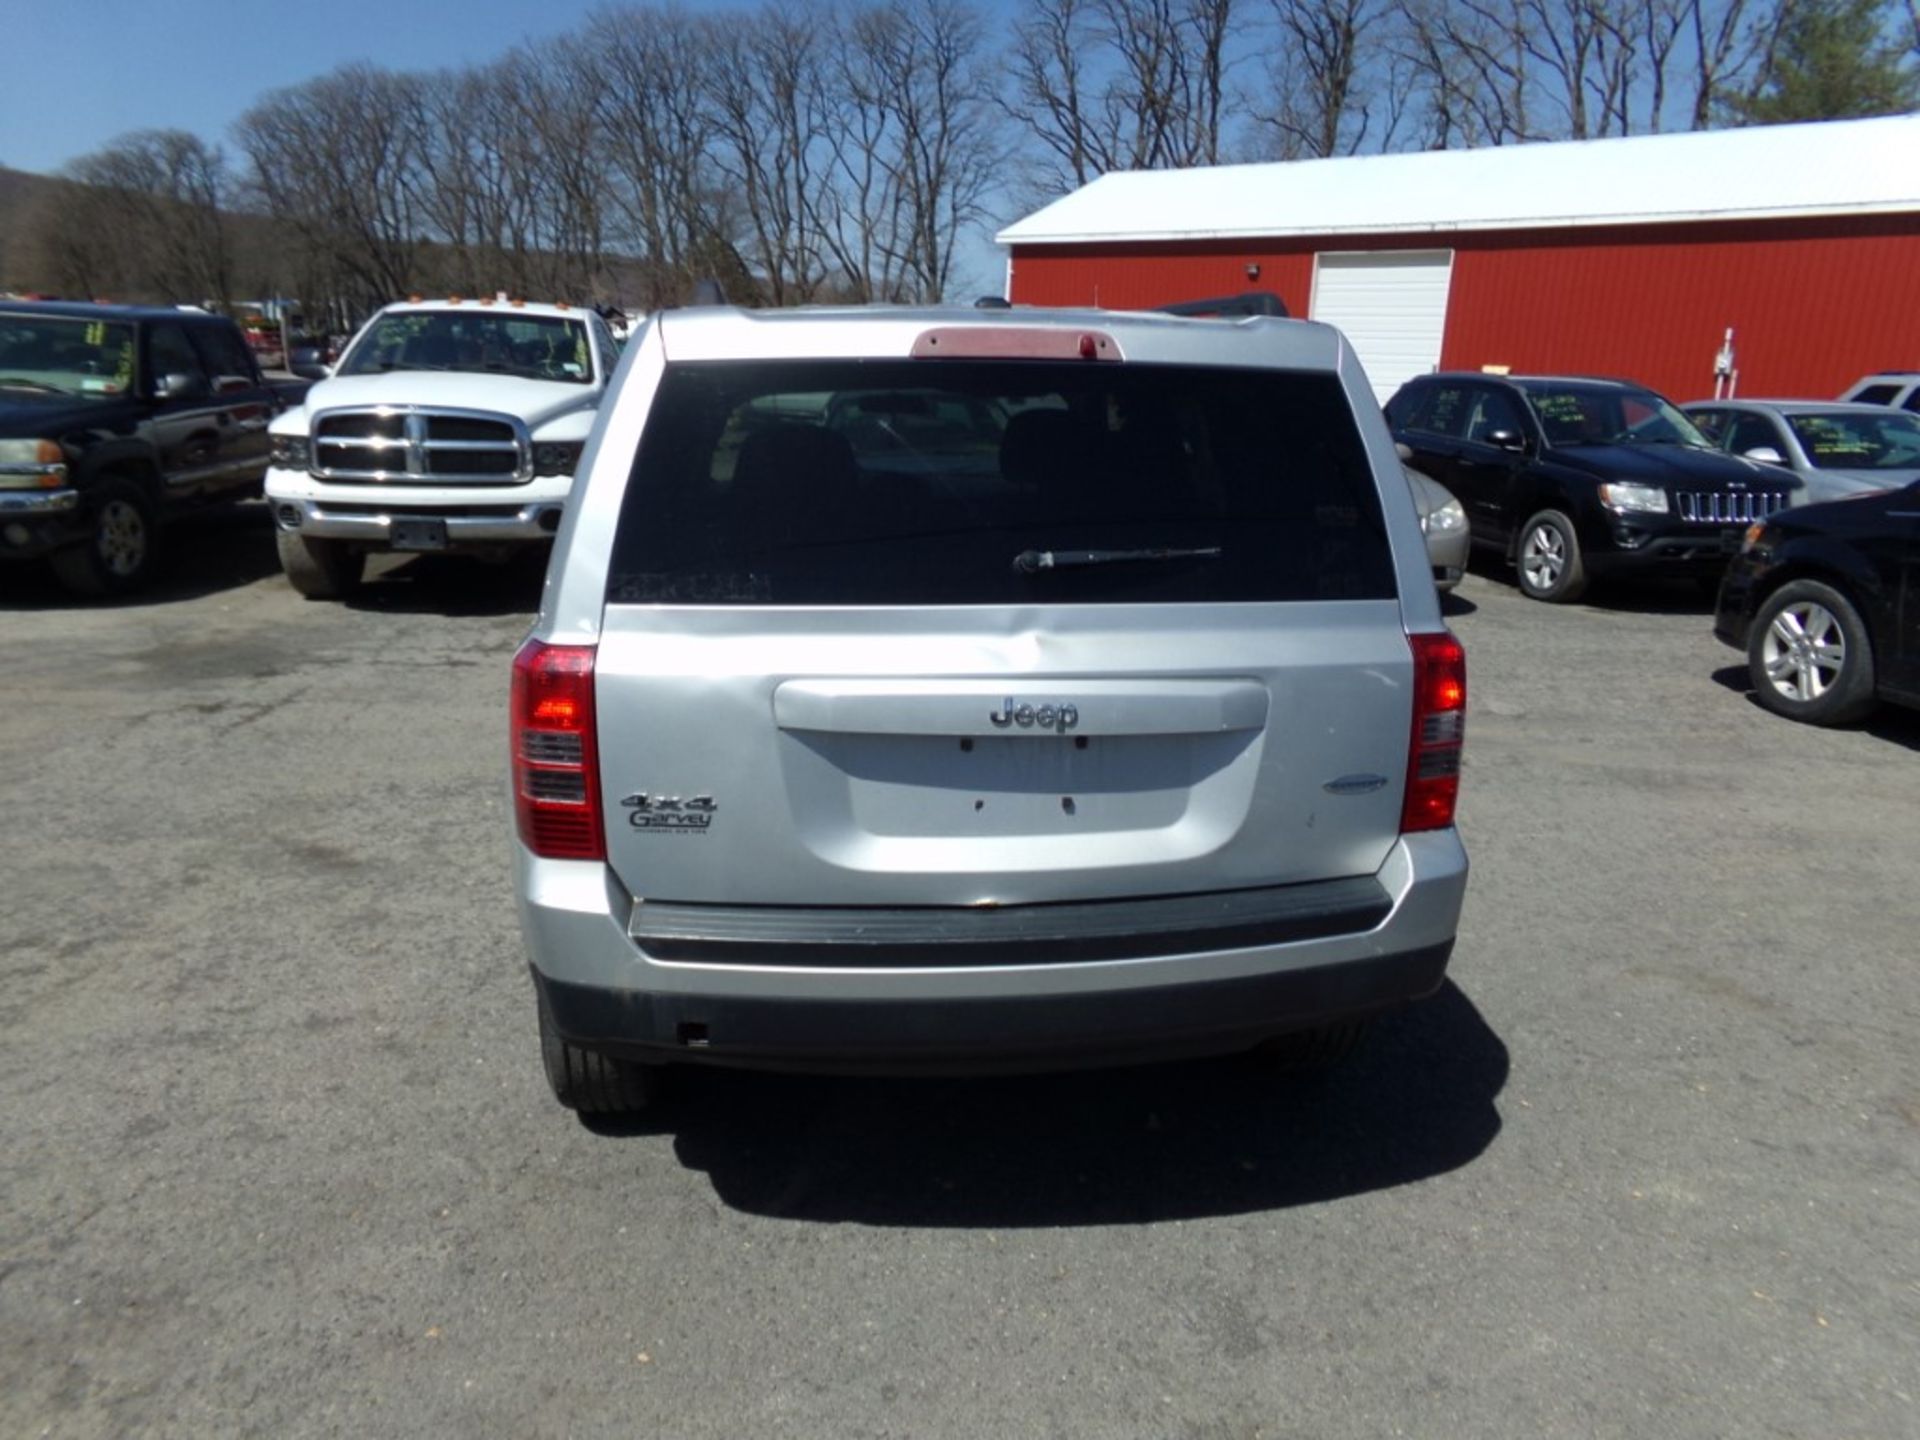 2011 Jeep Patriot Latitude 4x4, Silver, 138,349 Miles, VIN#:1J4NF1GB3BD277734, ENGINE NOISE, - Image 5 of 6